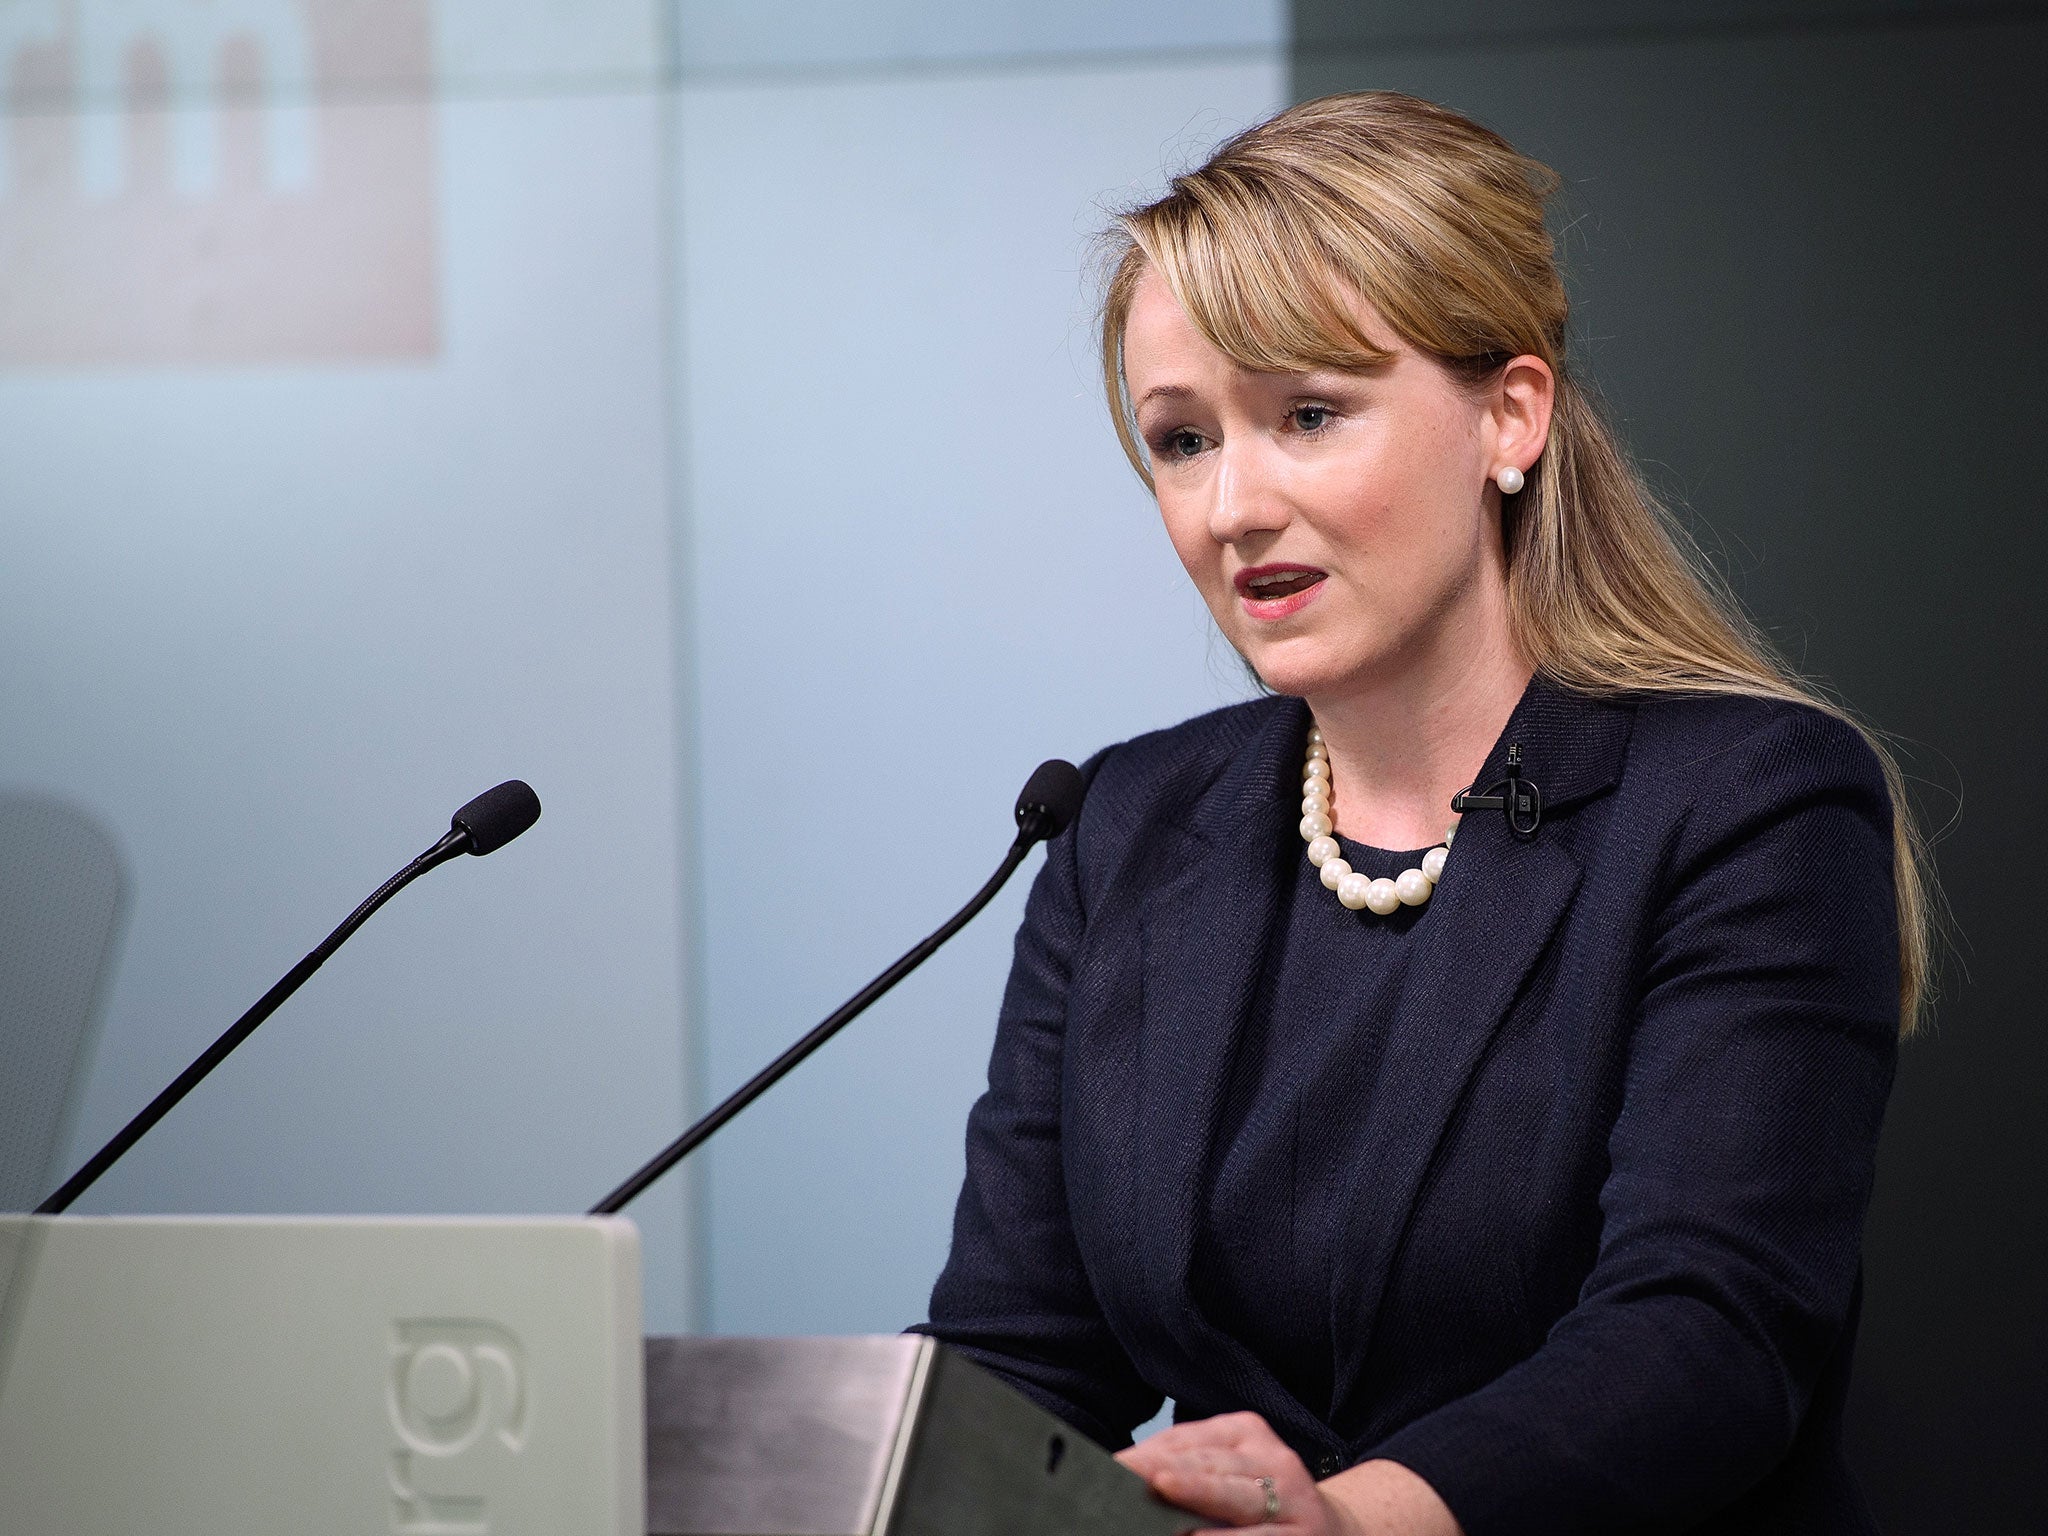 Rebecca Long-Bailey has been touted as a possible successor to Jeremy Corbyn